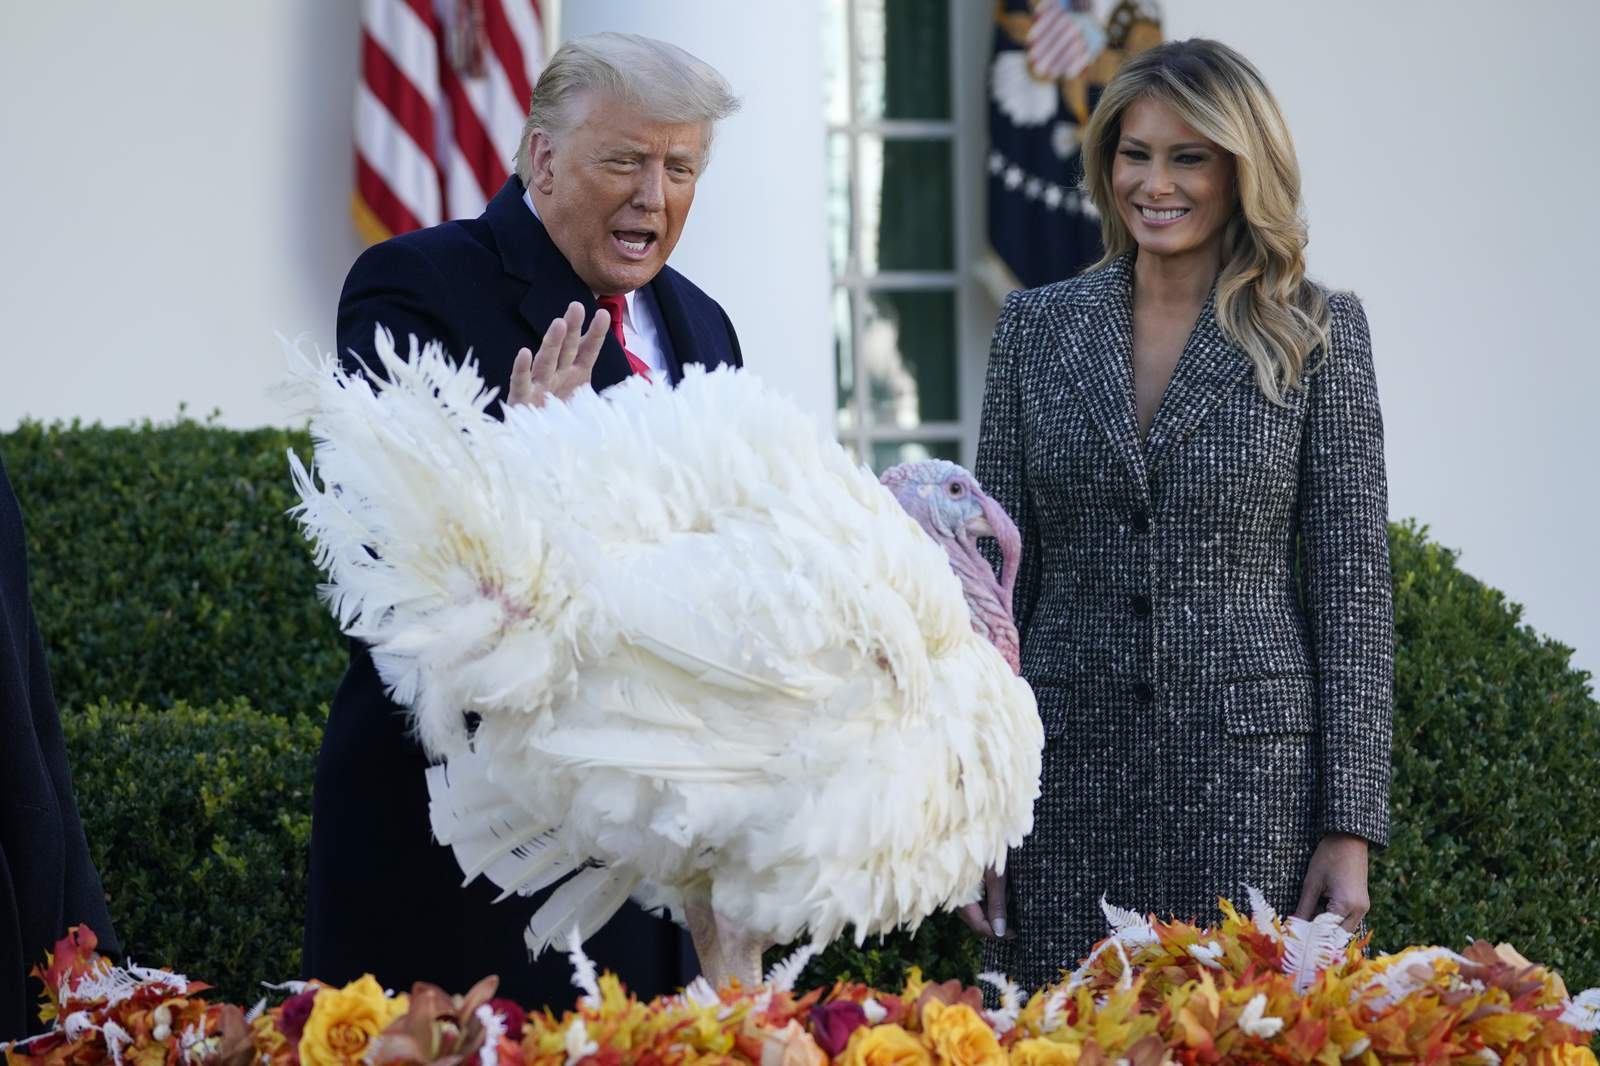 Trump skips turkey jokes, gives thanks for COVID-19 vaccines